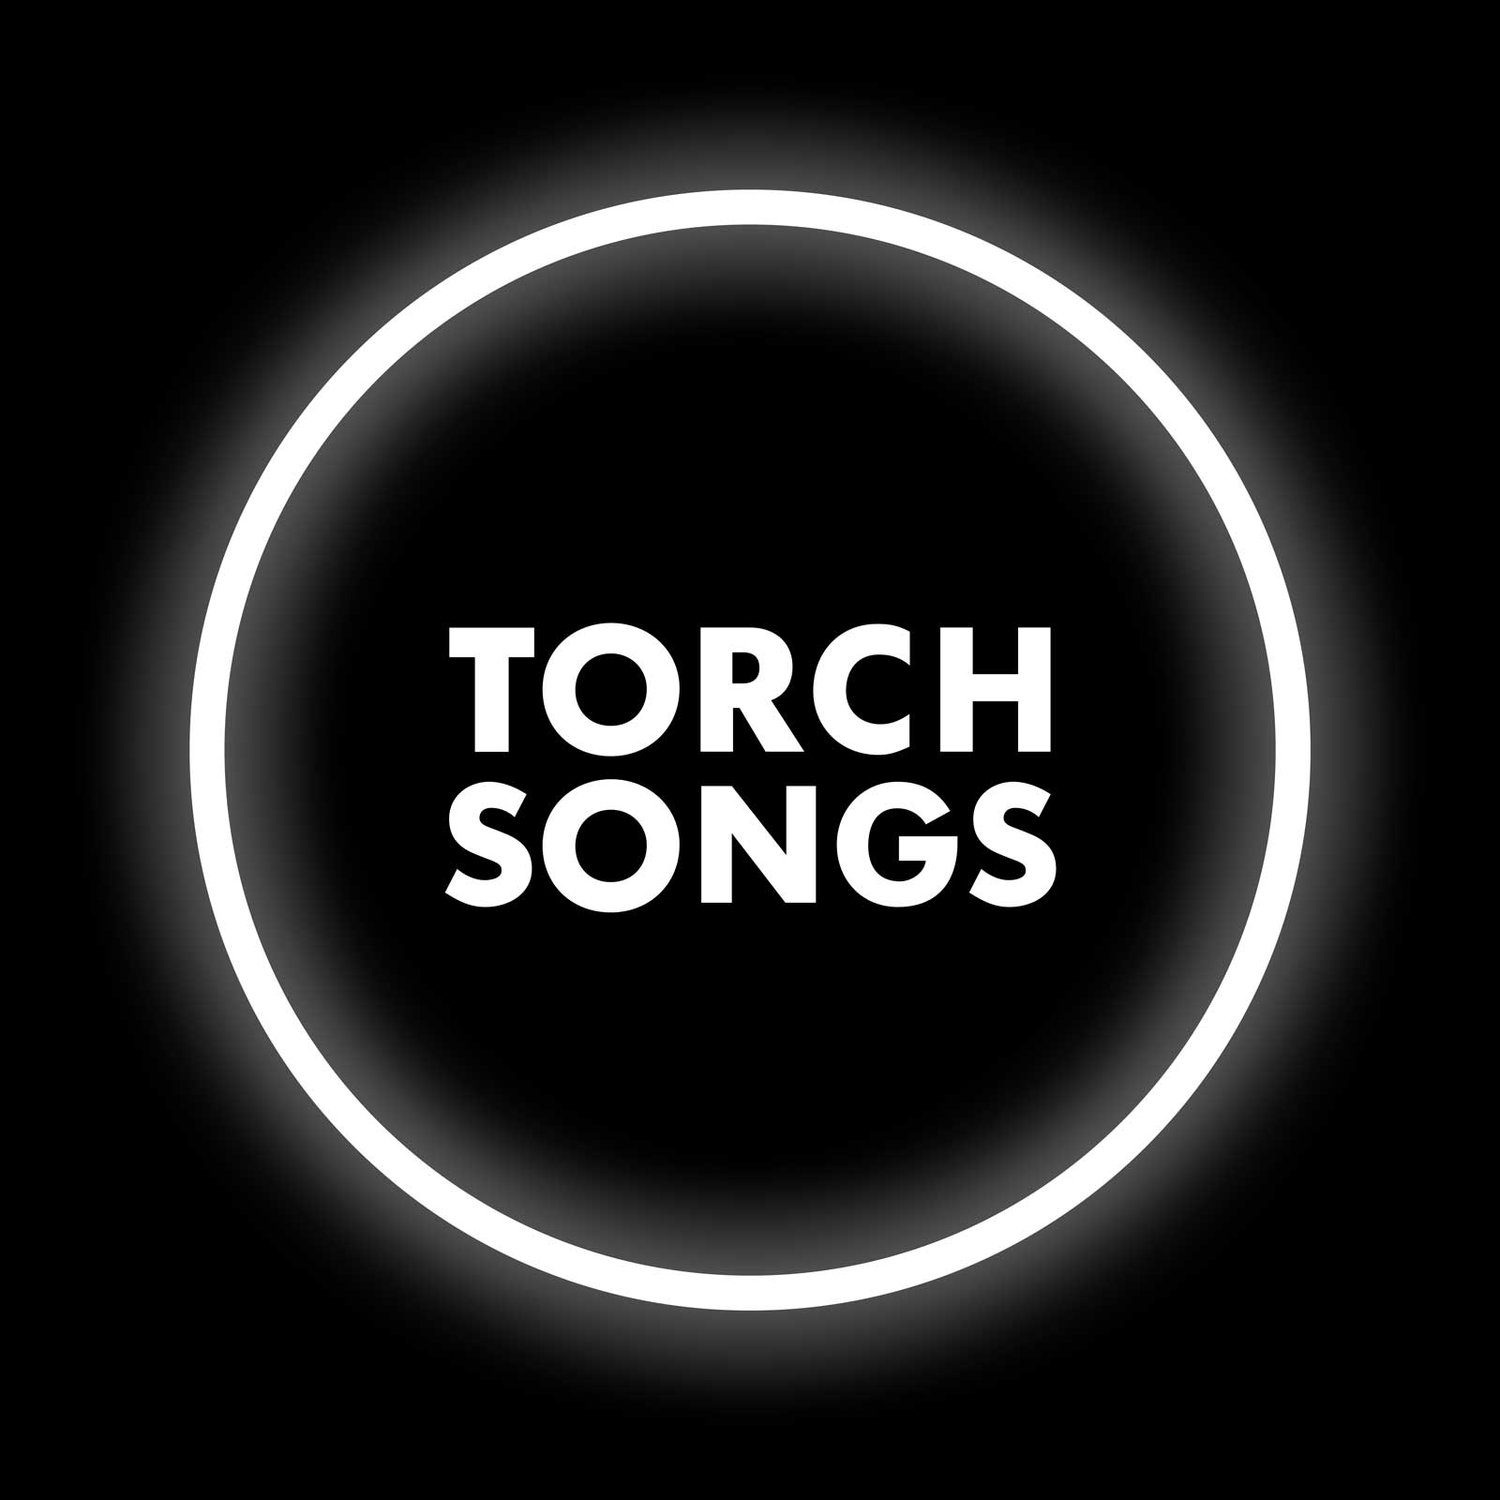 TORCH SONGS